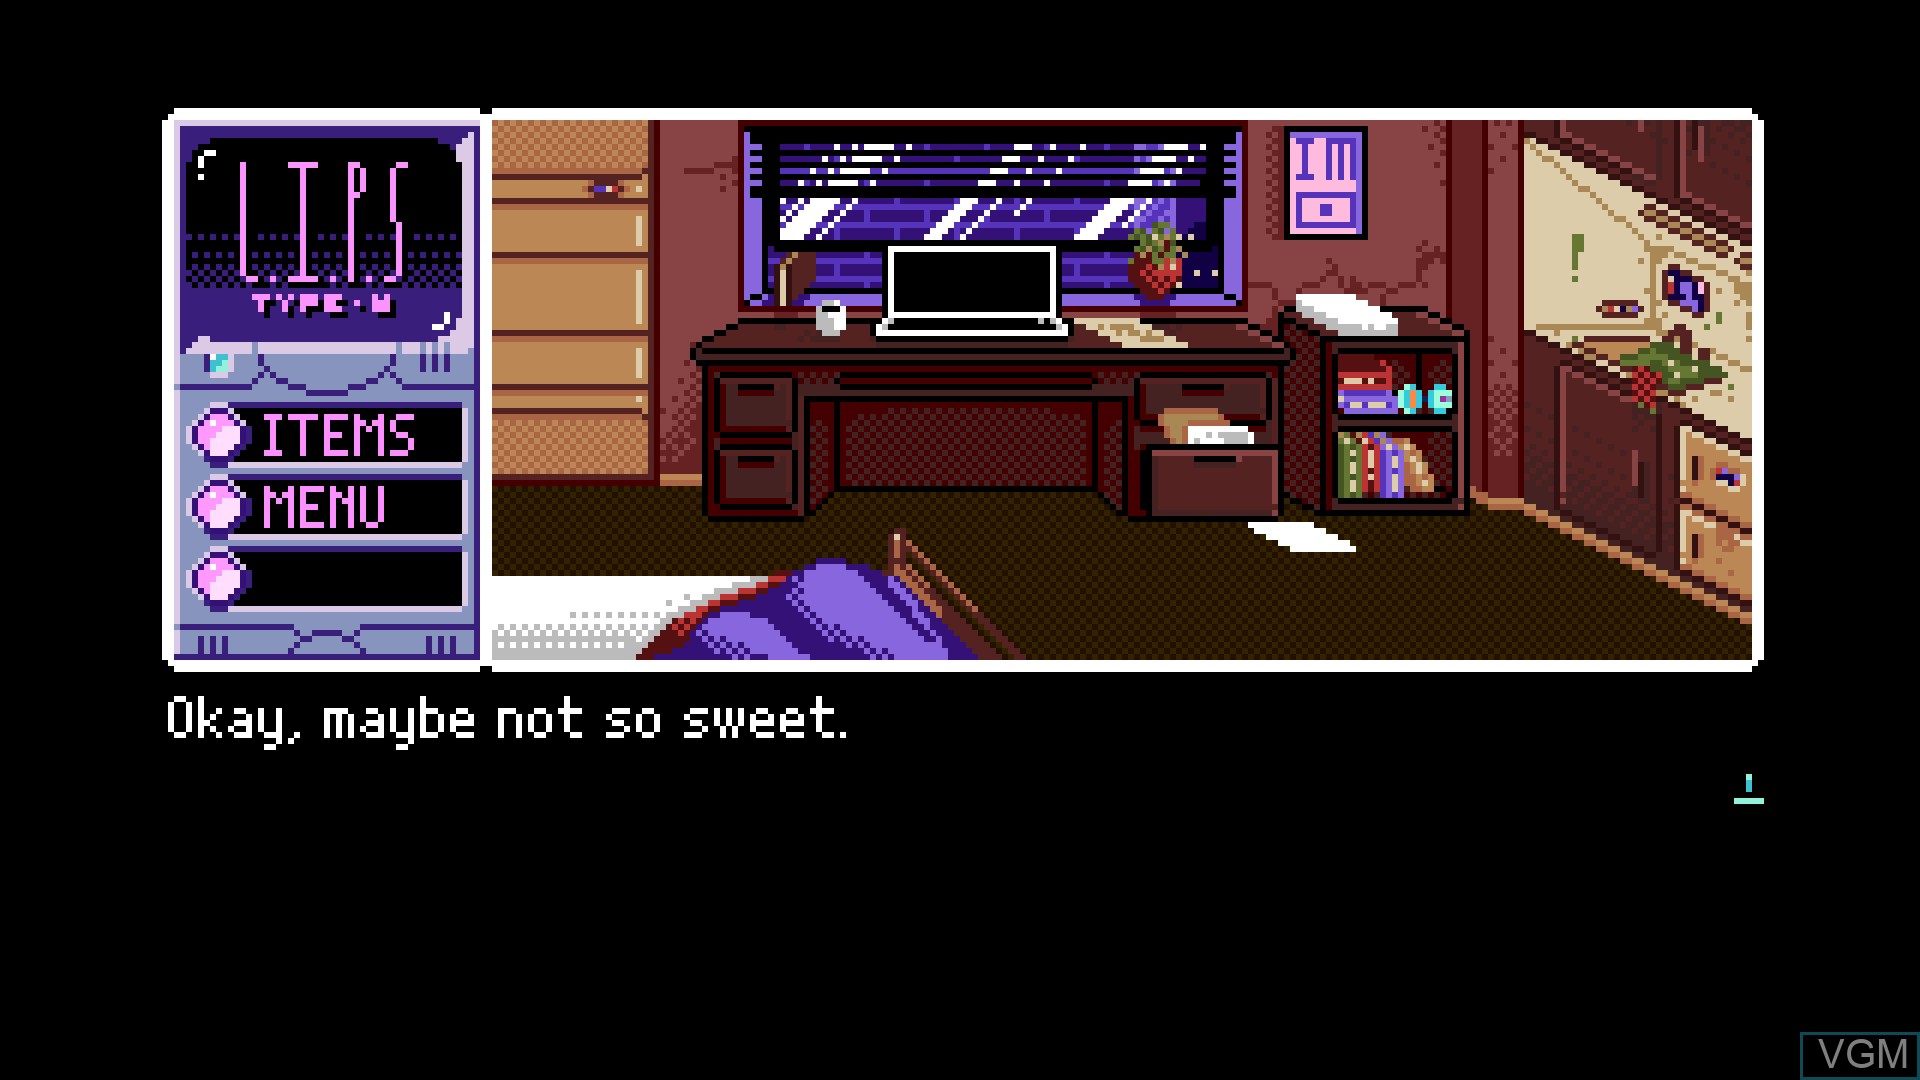 2064 Read Only Memories INTEGRAL